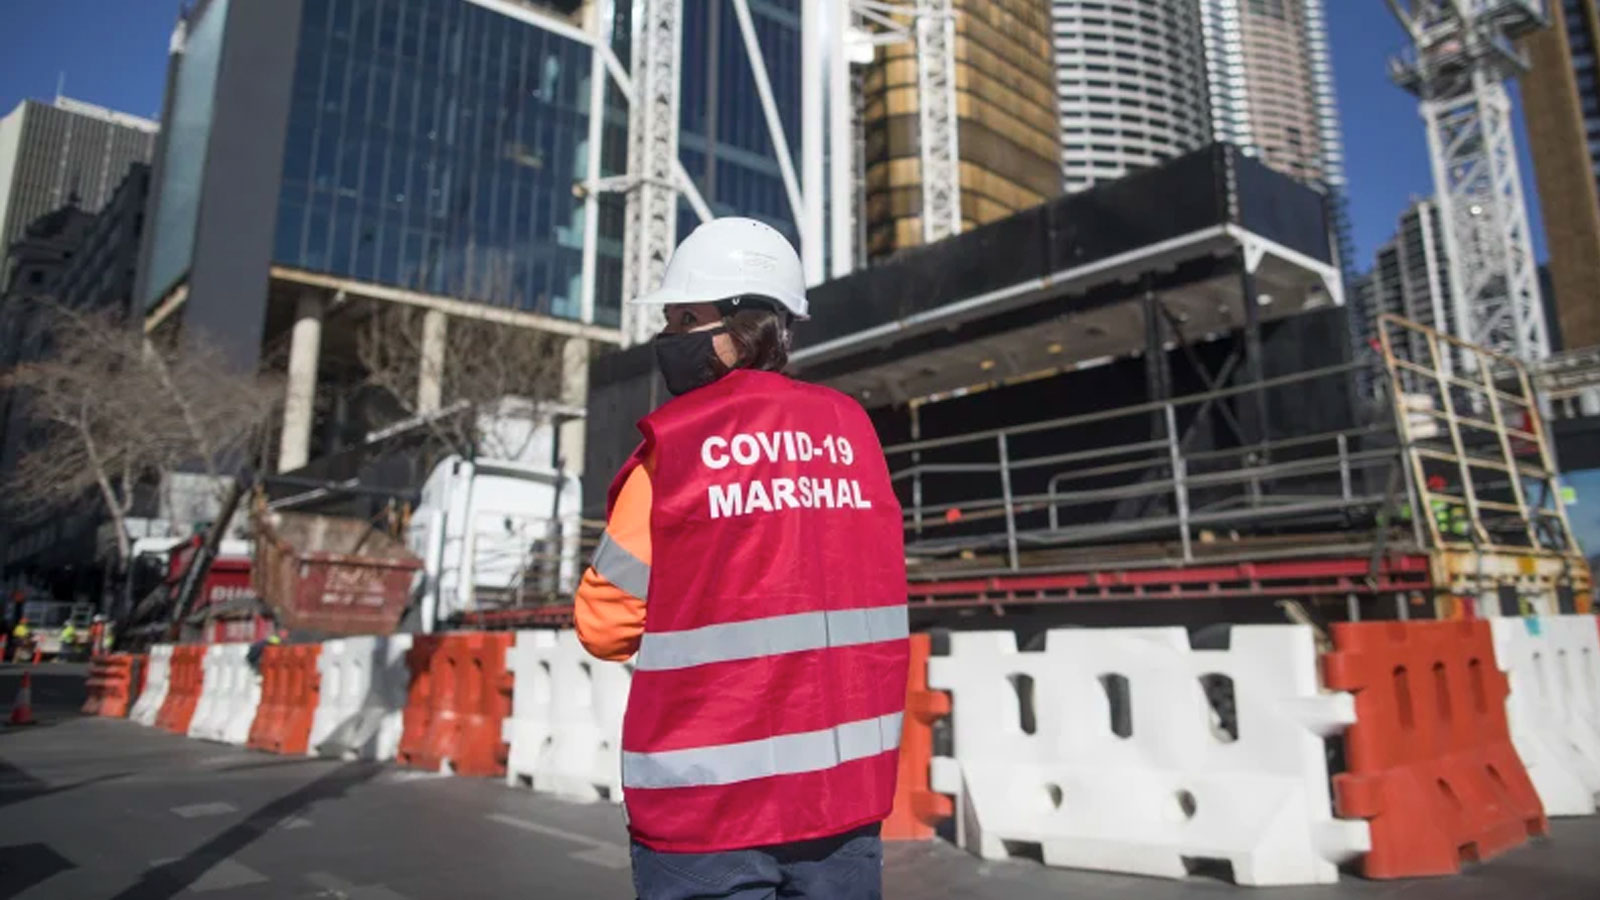 The NSW enterprise bargaining agreement, now under negotiation, is set to push wages up 5 per cent a year while in Victoria, contractors have agreed to a yearly 3 per cent rise for the next three years.